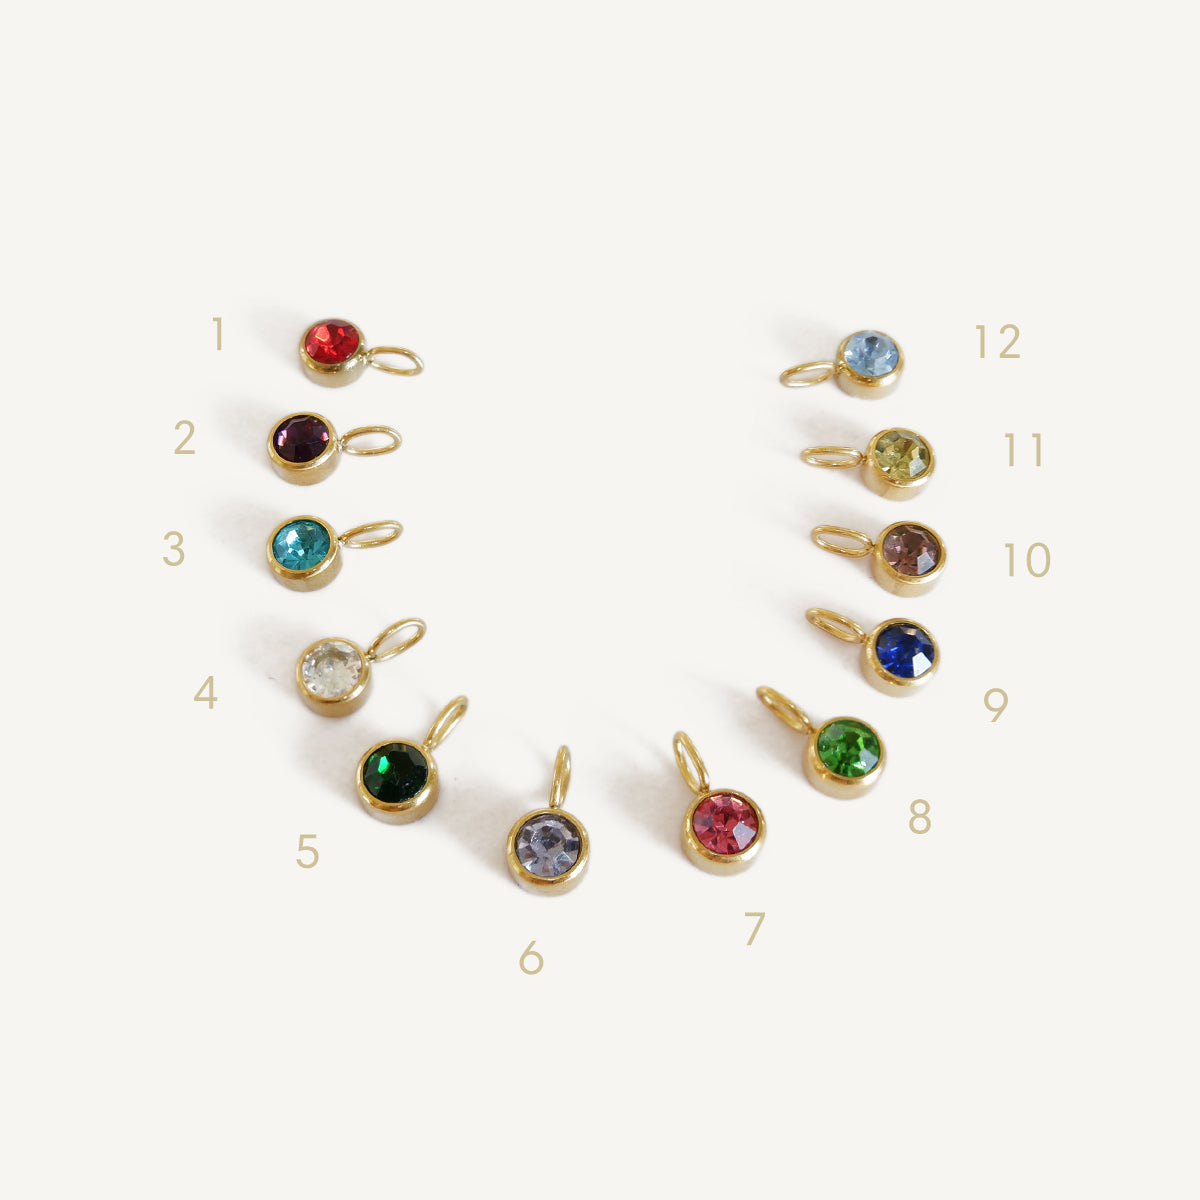 The Dainty Birthstone Necklace